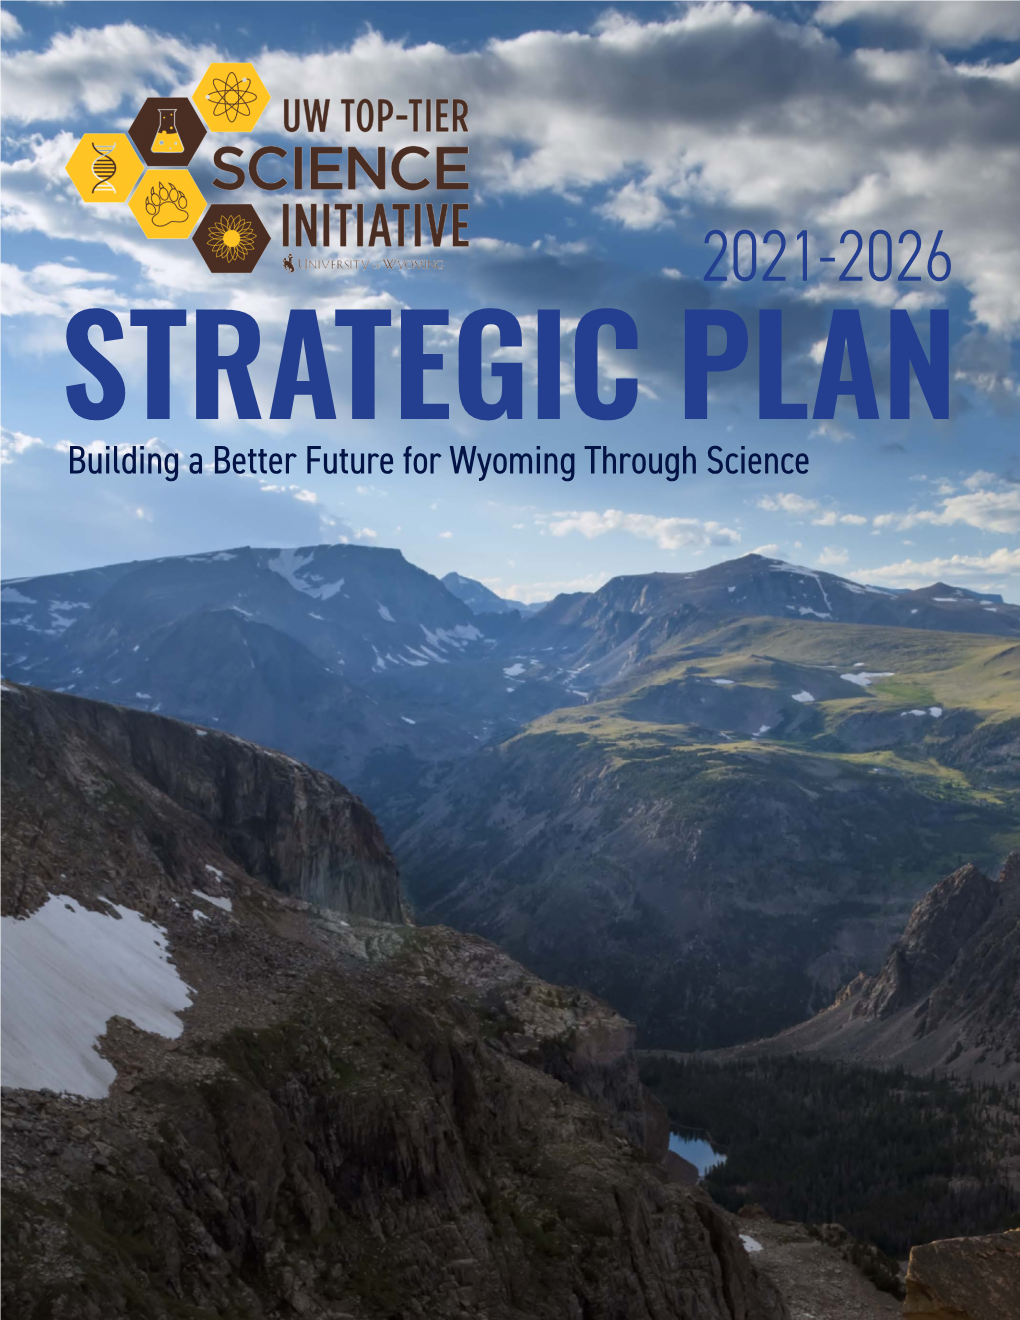 STRATEGIC PLAN Building a Better Future for Wyoming Through Science